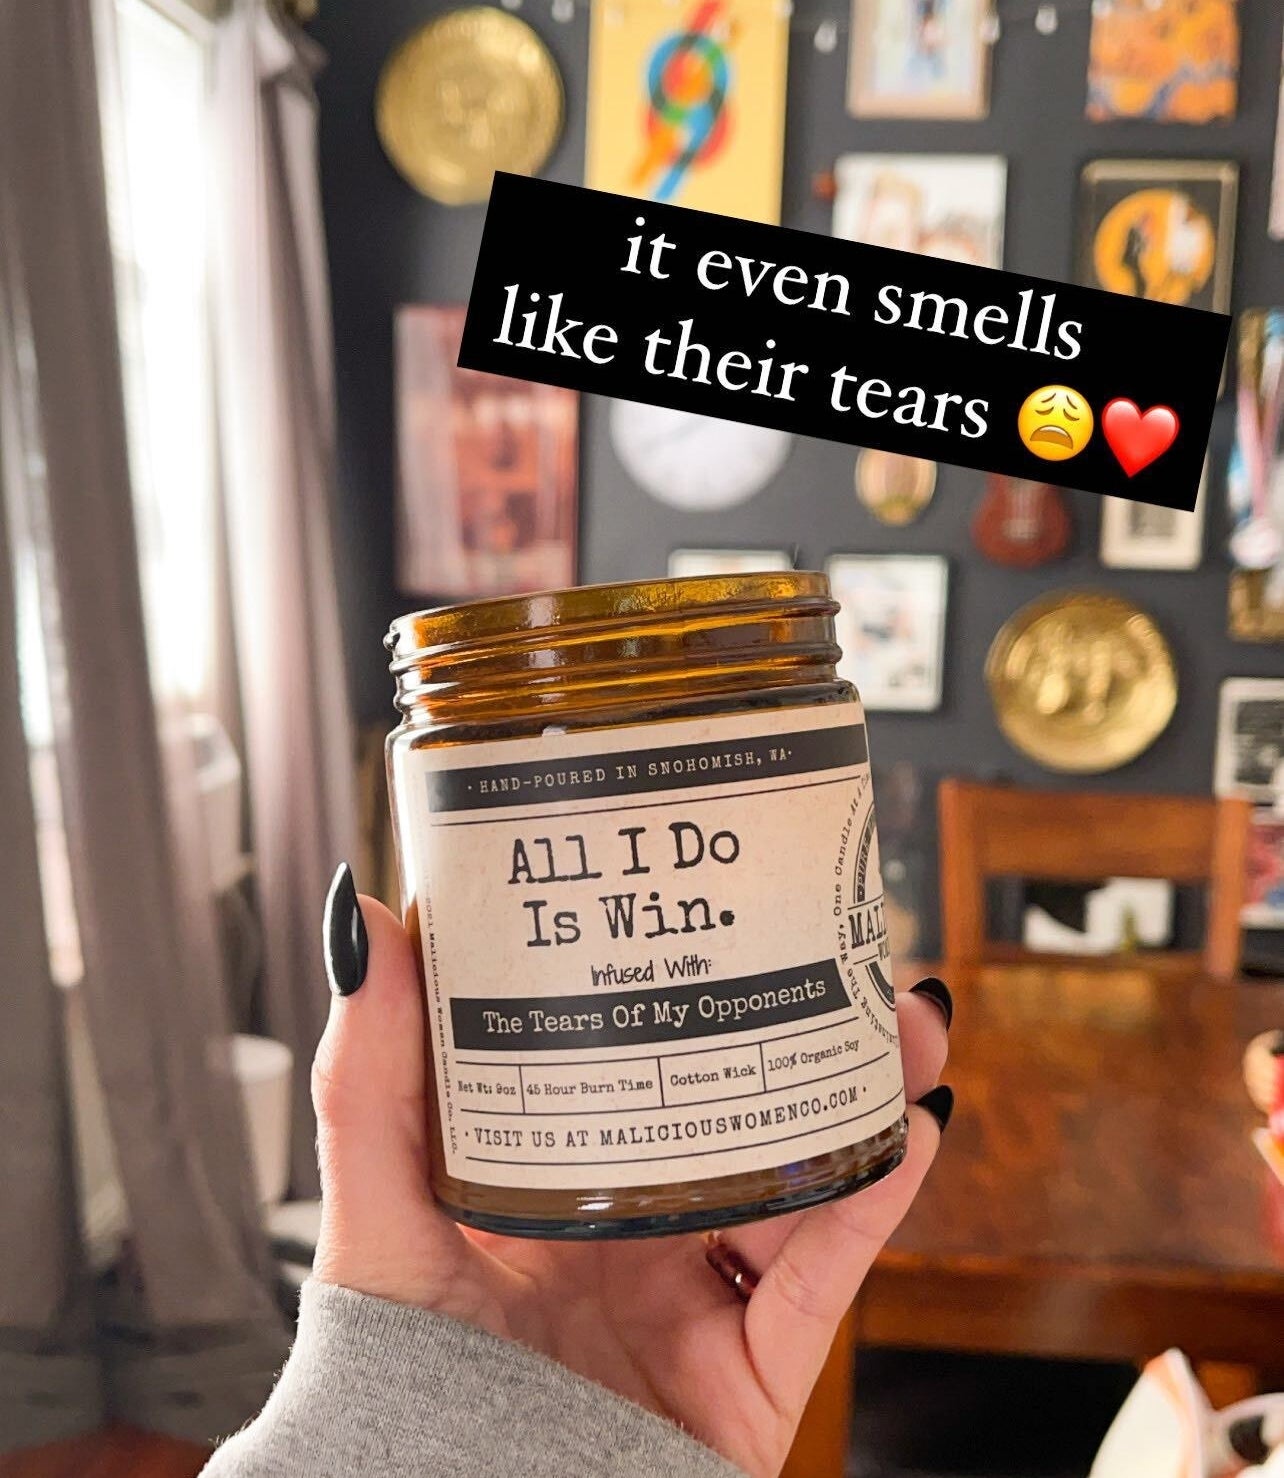 A person holding up a candle that says &quot;All I do is win, infused with the tears of my opponents&quot; and the words &quot;it even smells like their tears&quot; written on the image